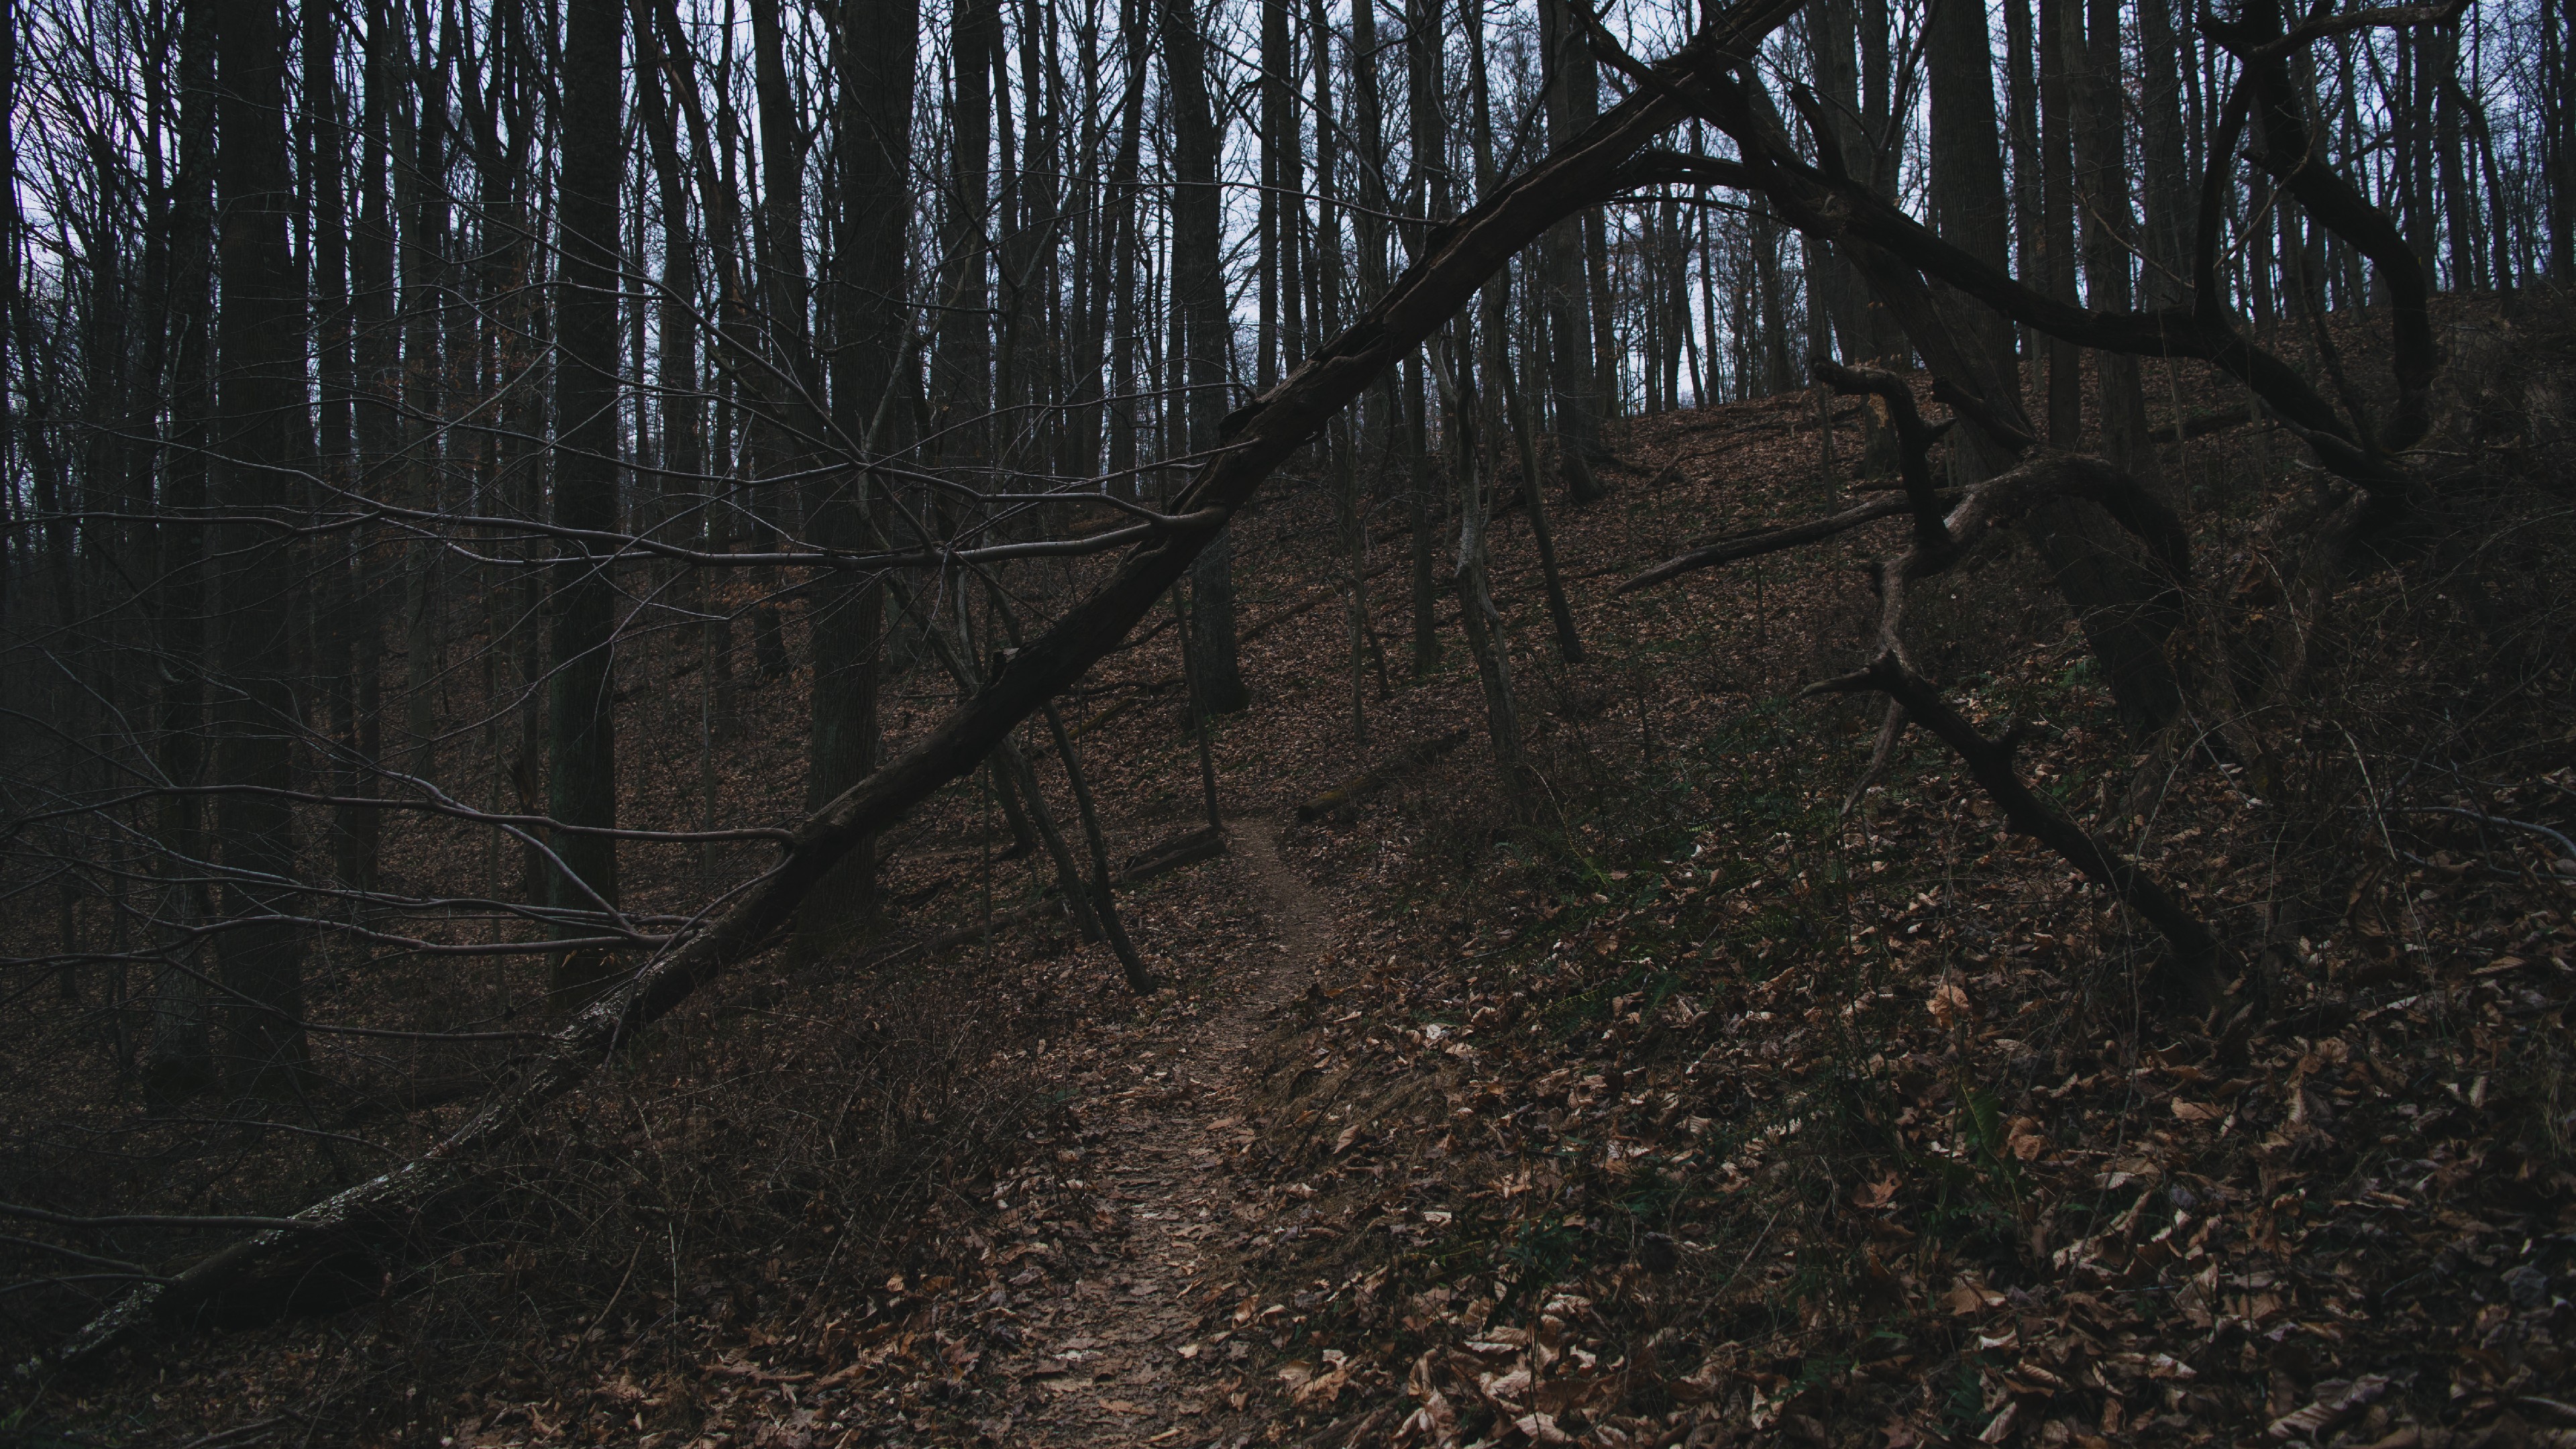 General 3840x2160 nature trees forest gloomy fall path